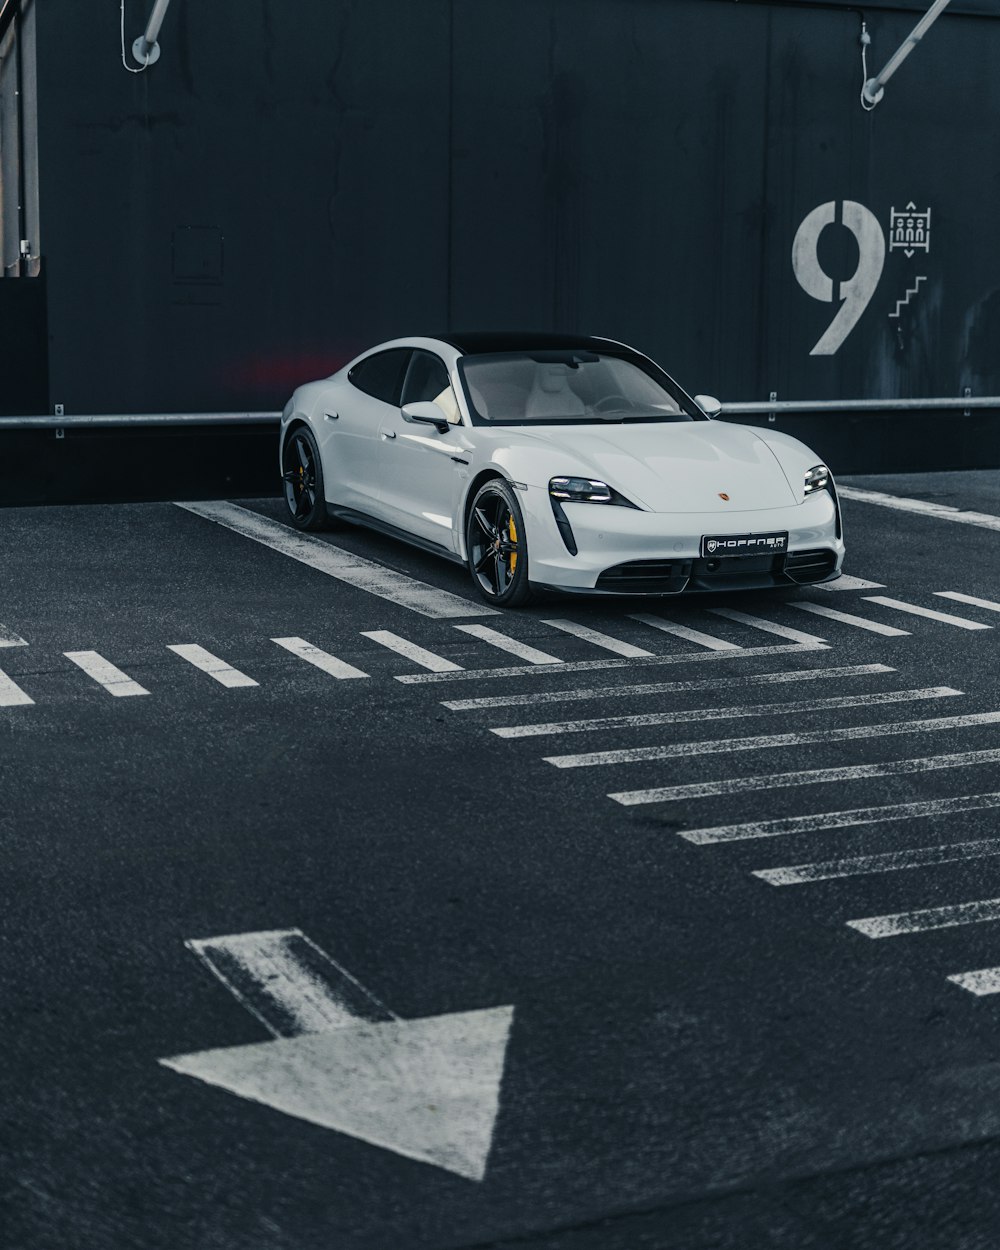 a white sports car parked in a parking lot